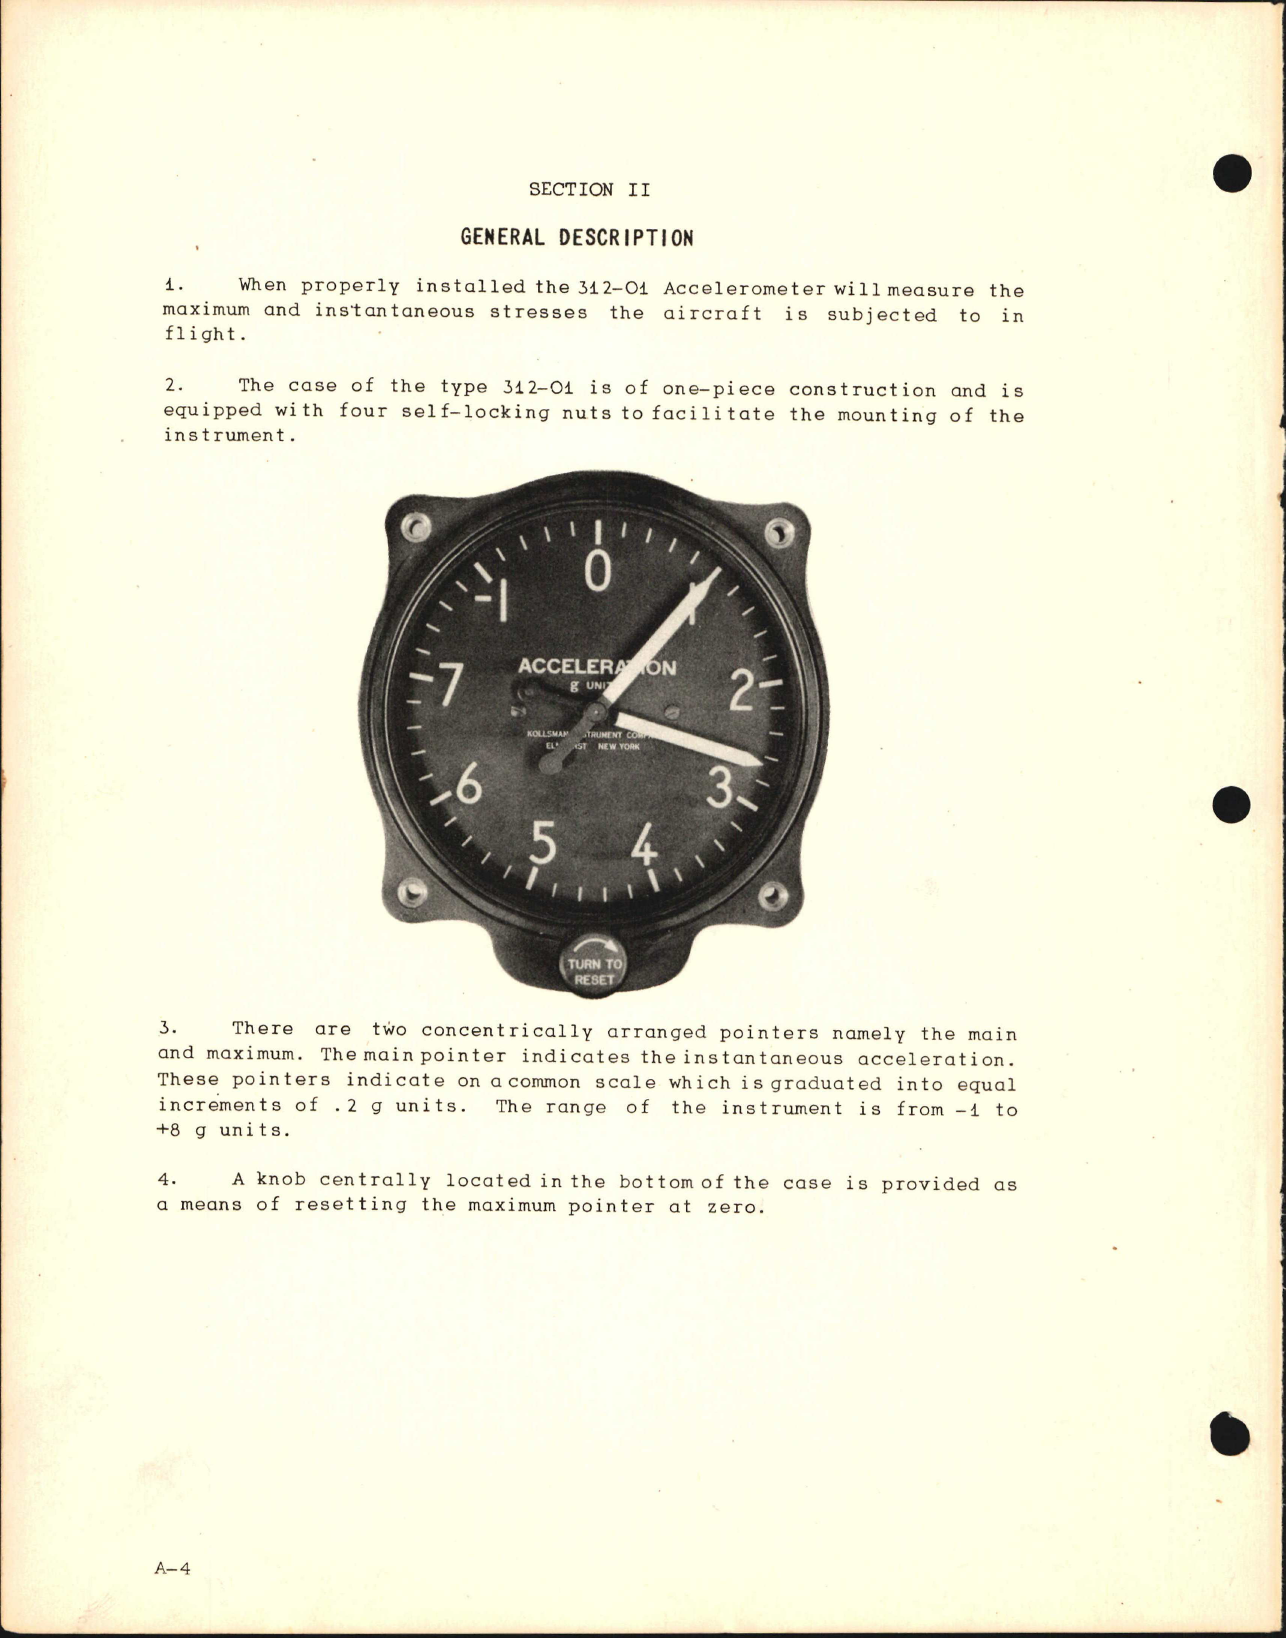 Sample page 8 from AirCorps Library document: Kollsman Instrument Maintenance Manual